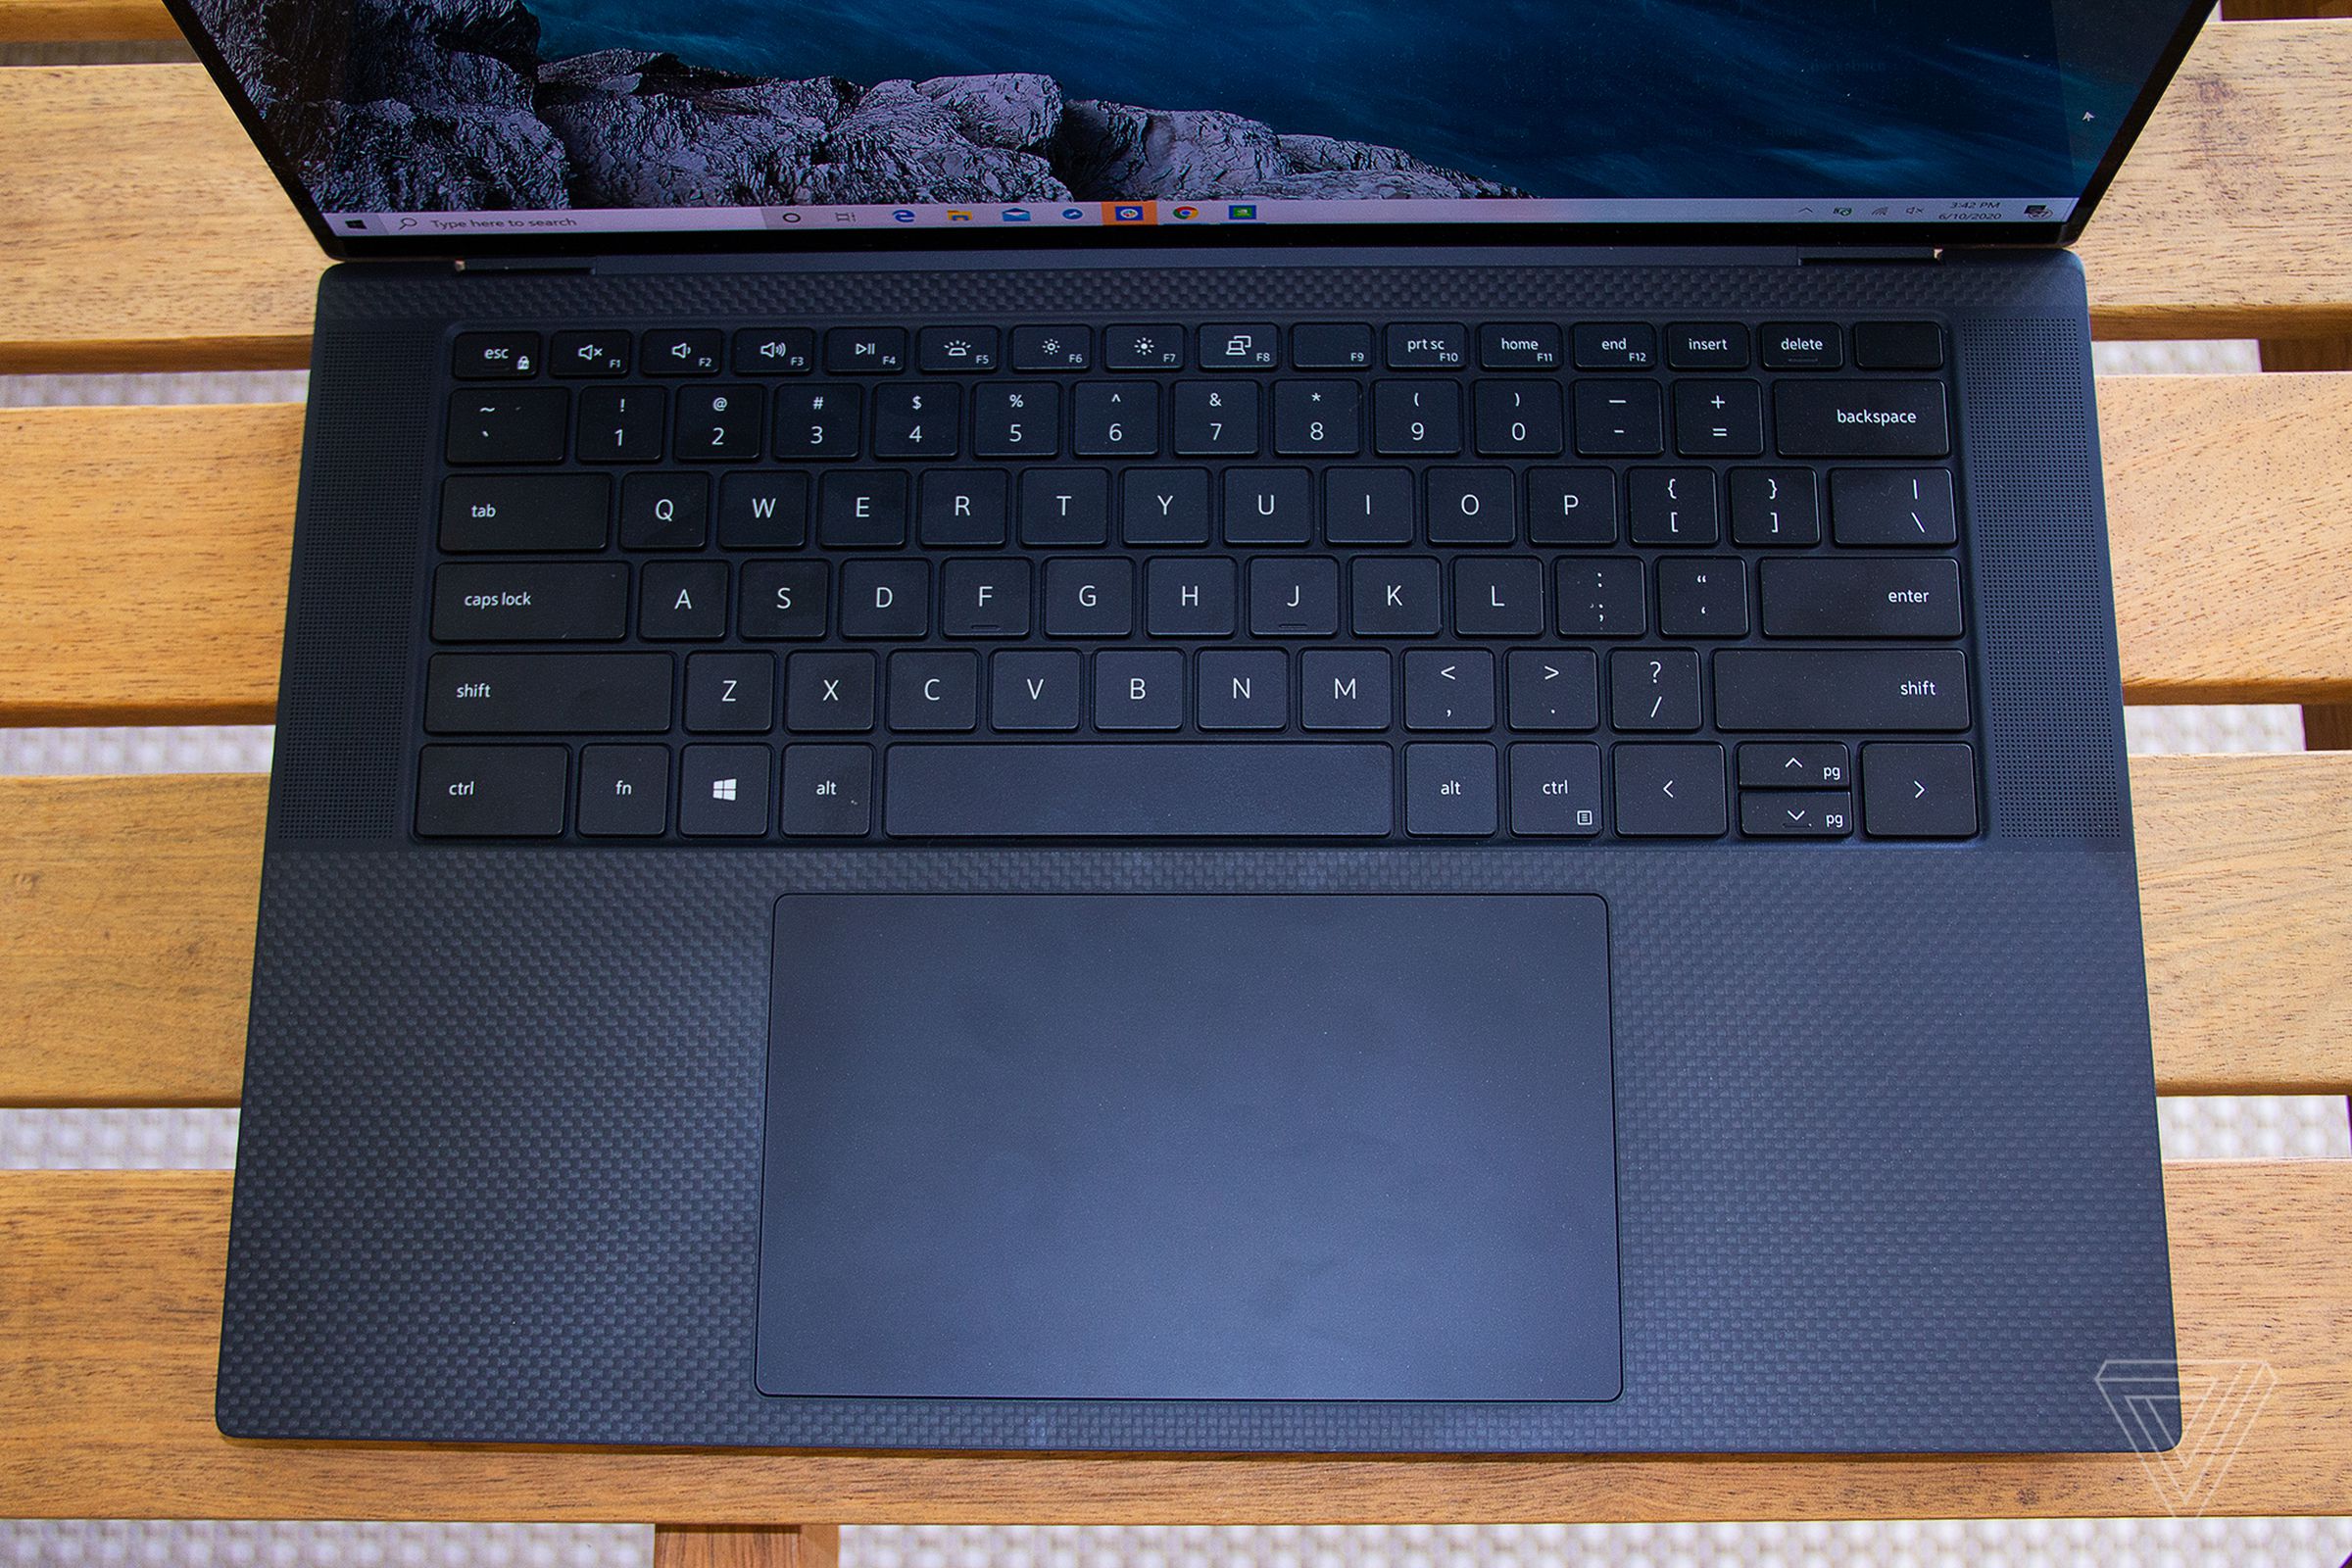 Top down view of the keyboard of the Dell XPS 15 laptop.